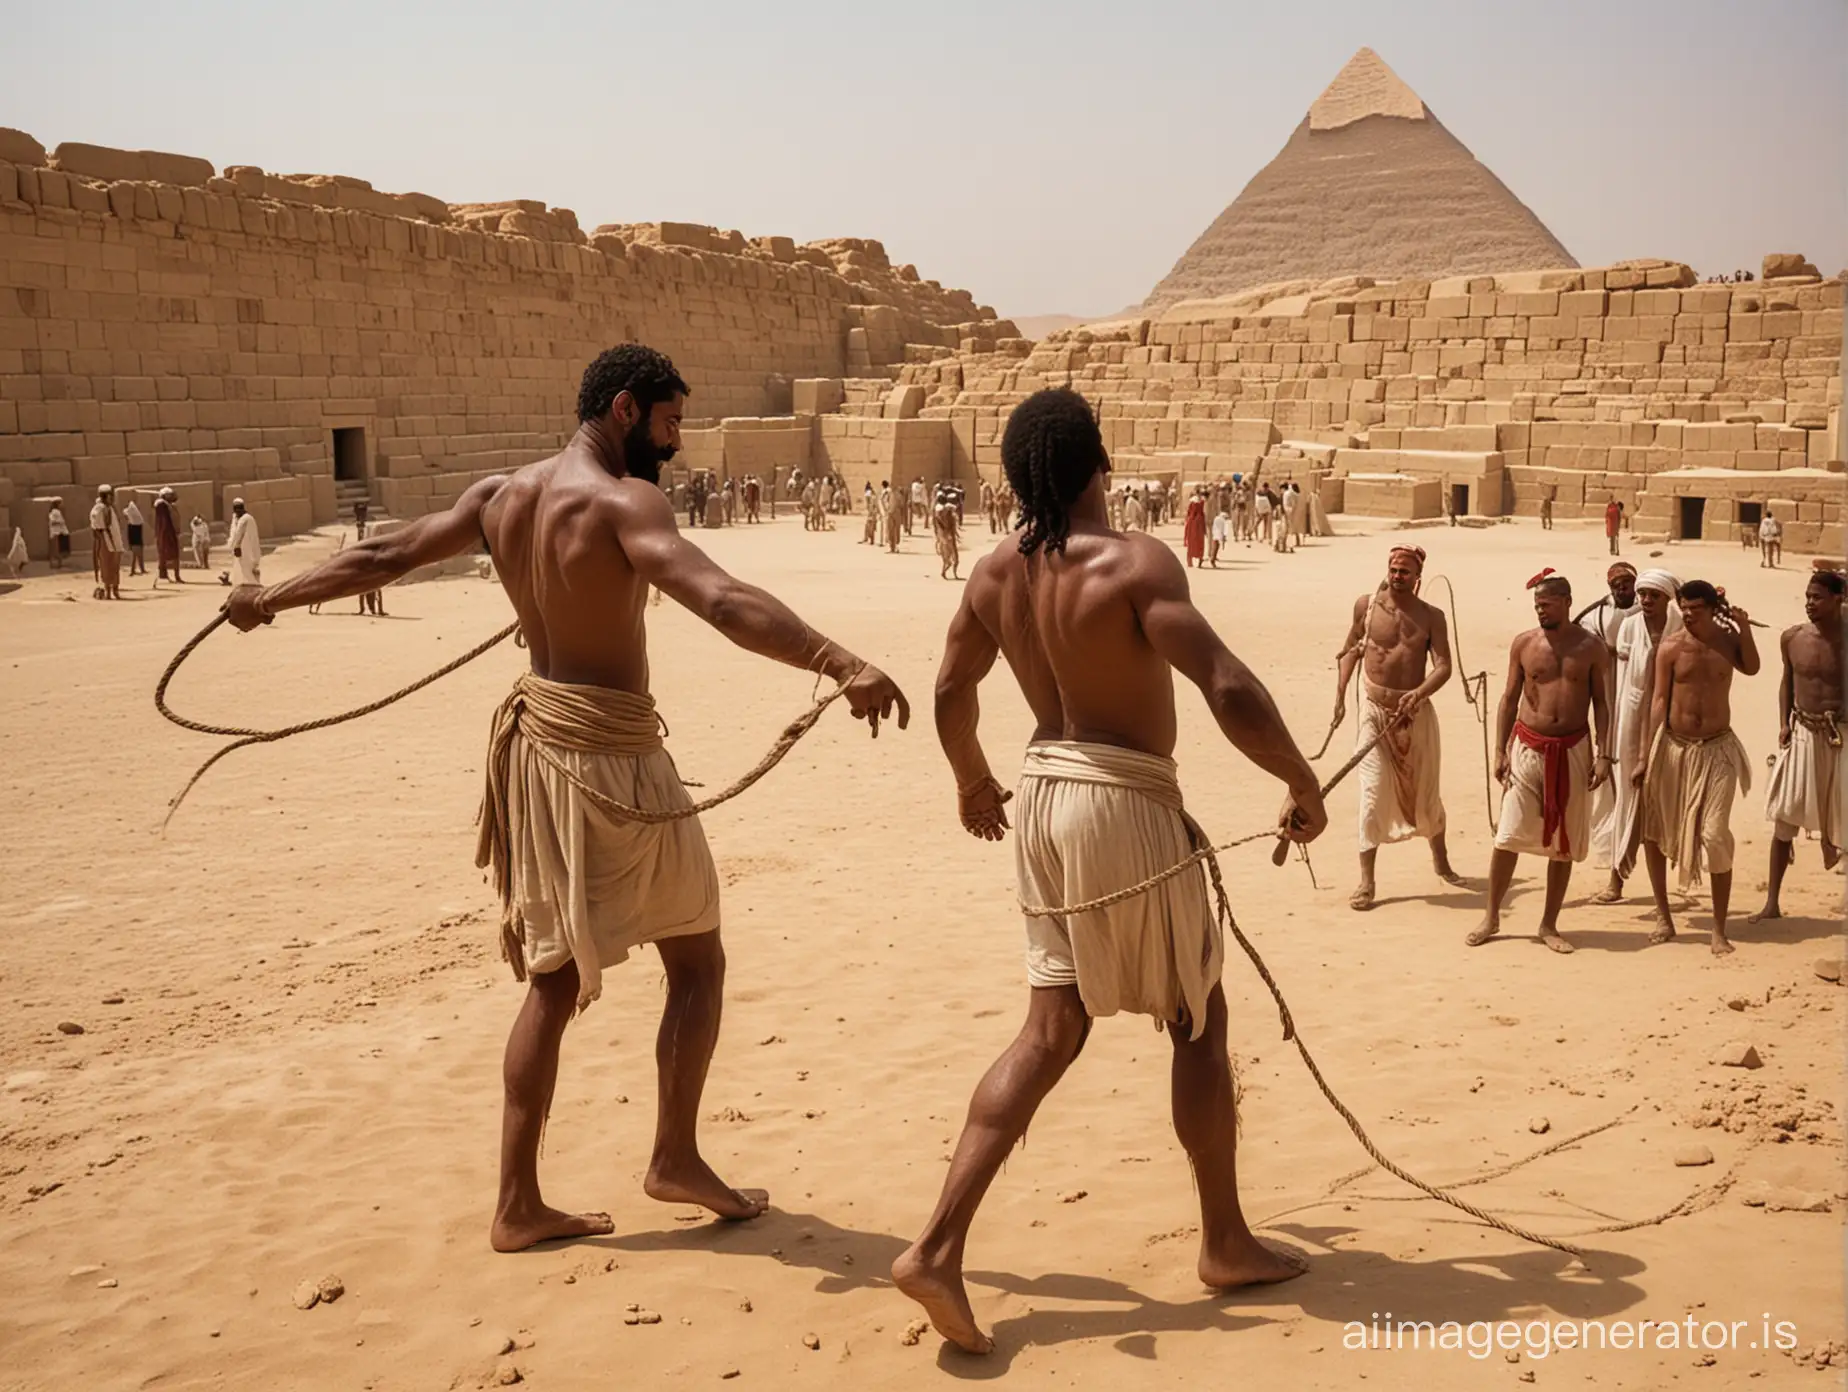 In ancient Egypt, a Jewish slave is whipped by a guard. Only the slave's back is visible. The whip causes bloody welts on his back. The blood is flowing. A pyramid construction site in the background.